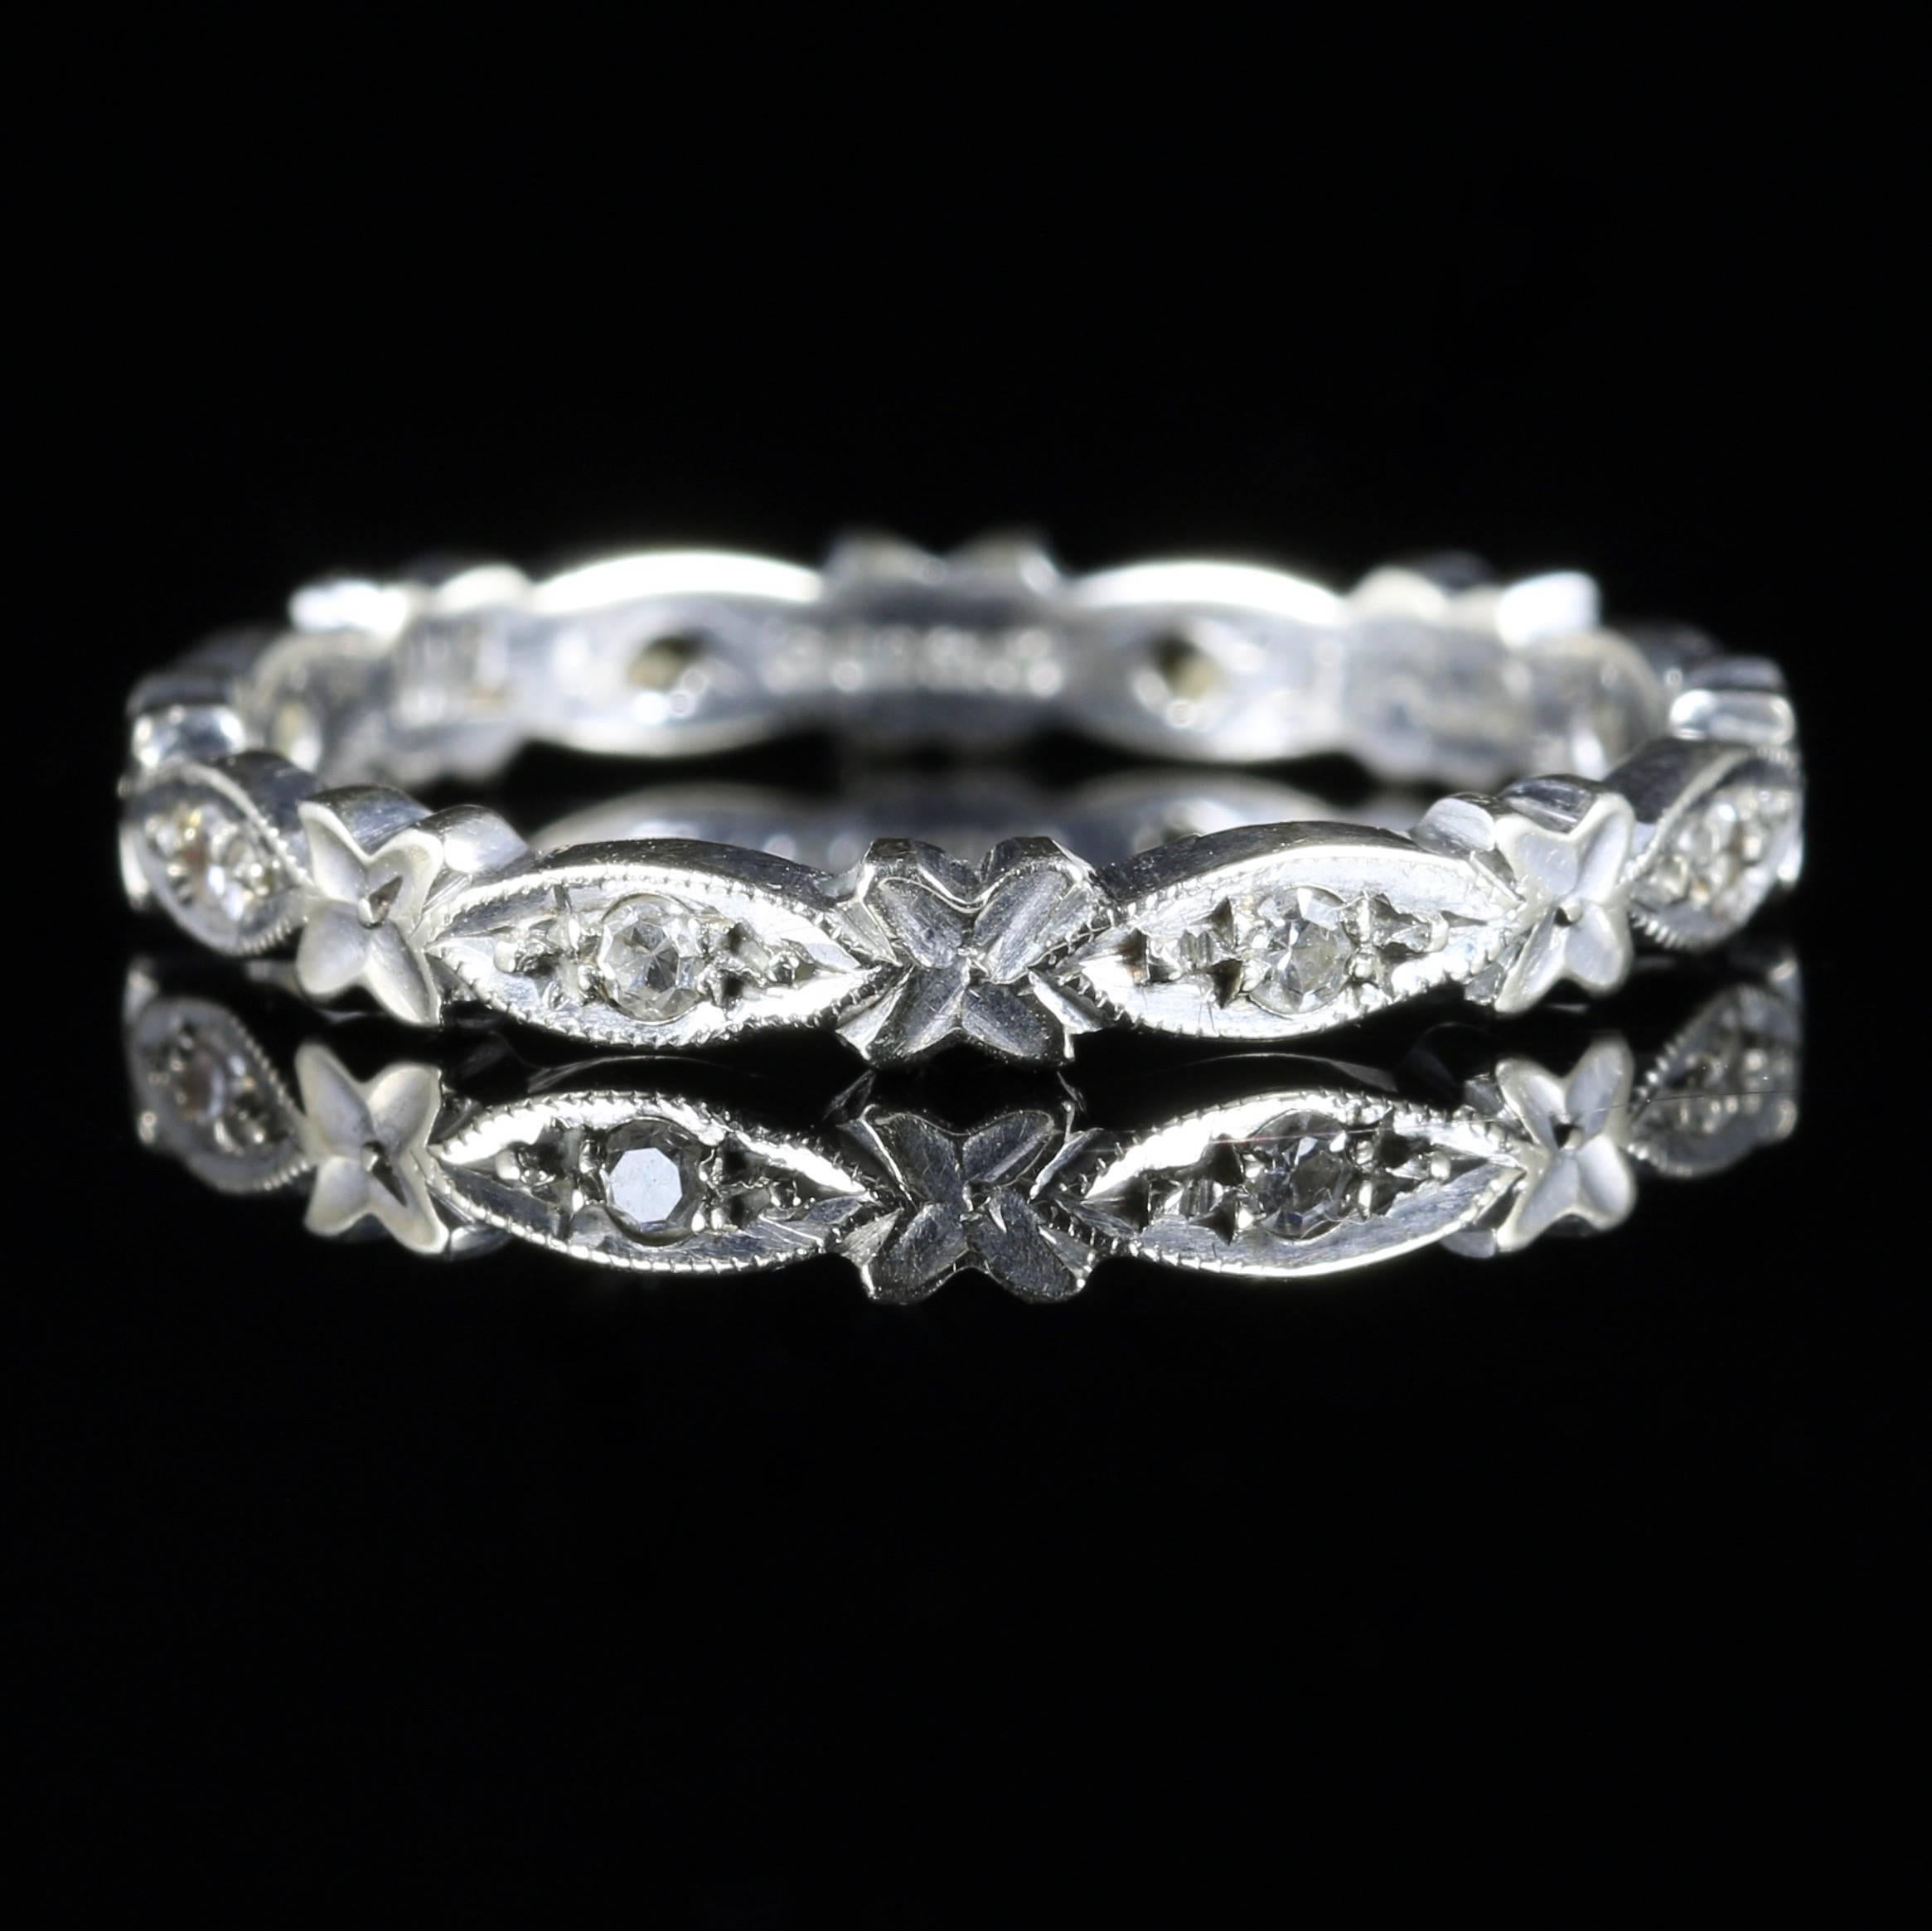 For more details please click continue reading down below...

This stunning antique Edwardian Diamond eternity ring is set in 18ct White Gold. Circa 1915

Beautiful workmanship is set all round this pretty Edwardian ring.

Adorned with 8 sparkling